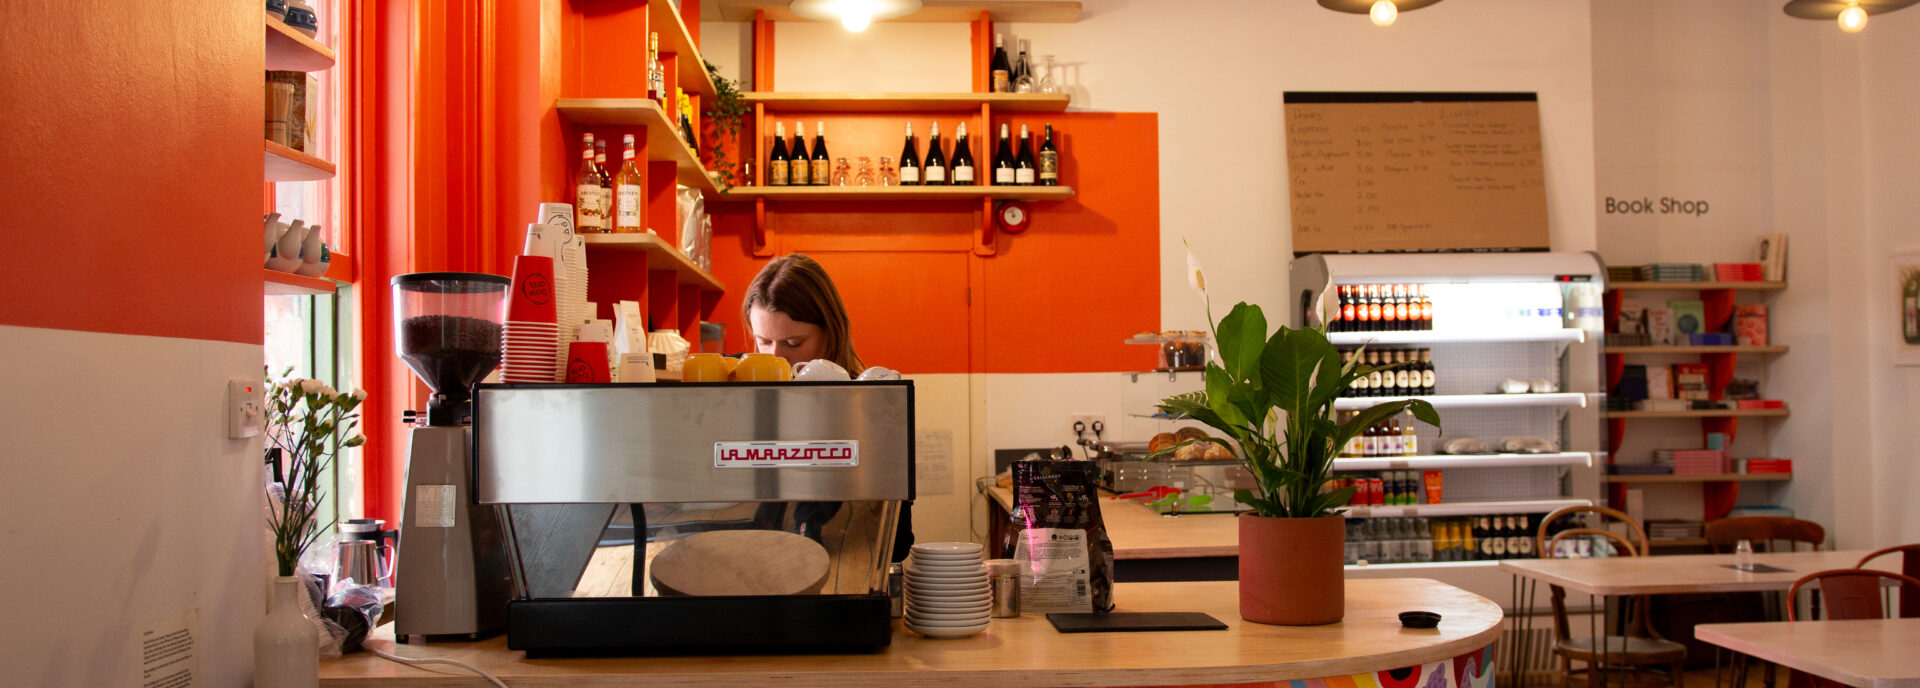 cafe interior with person making a coffee on a coffee machine.